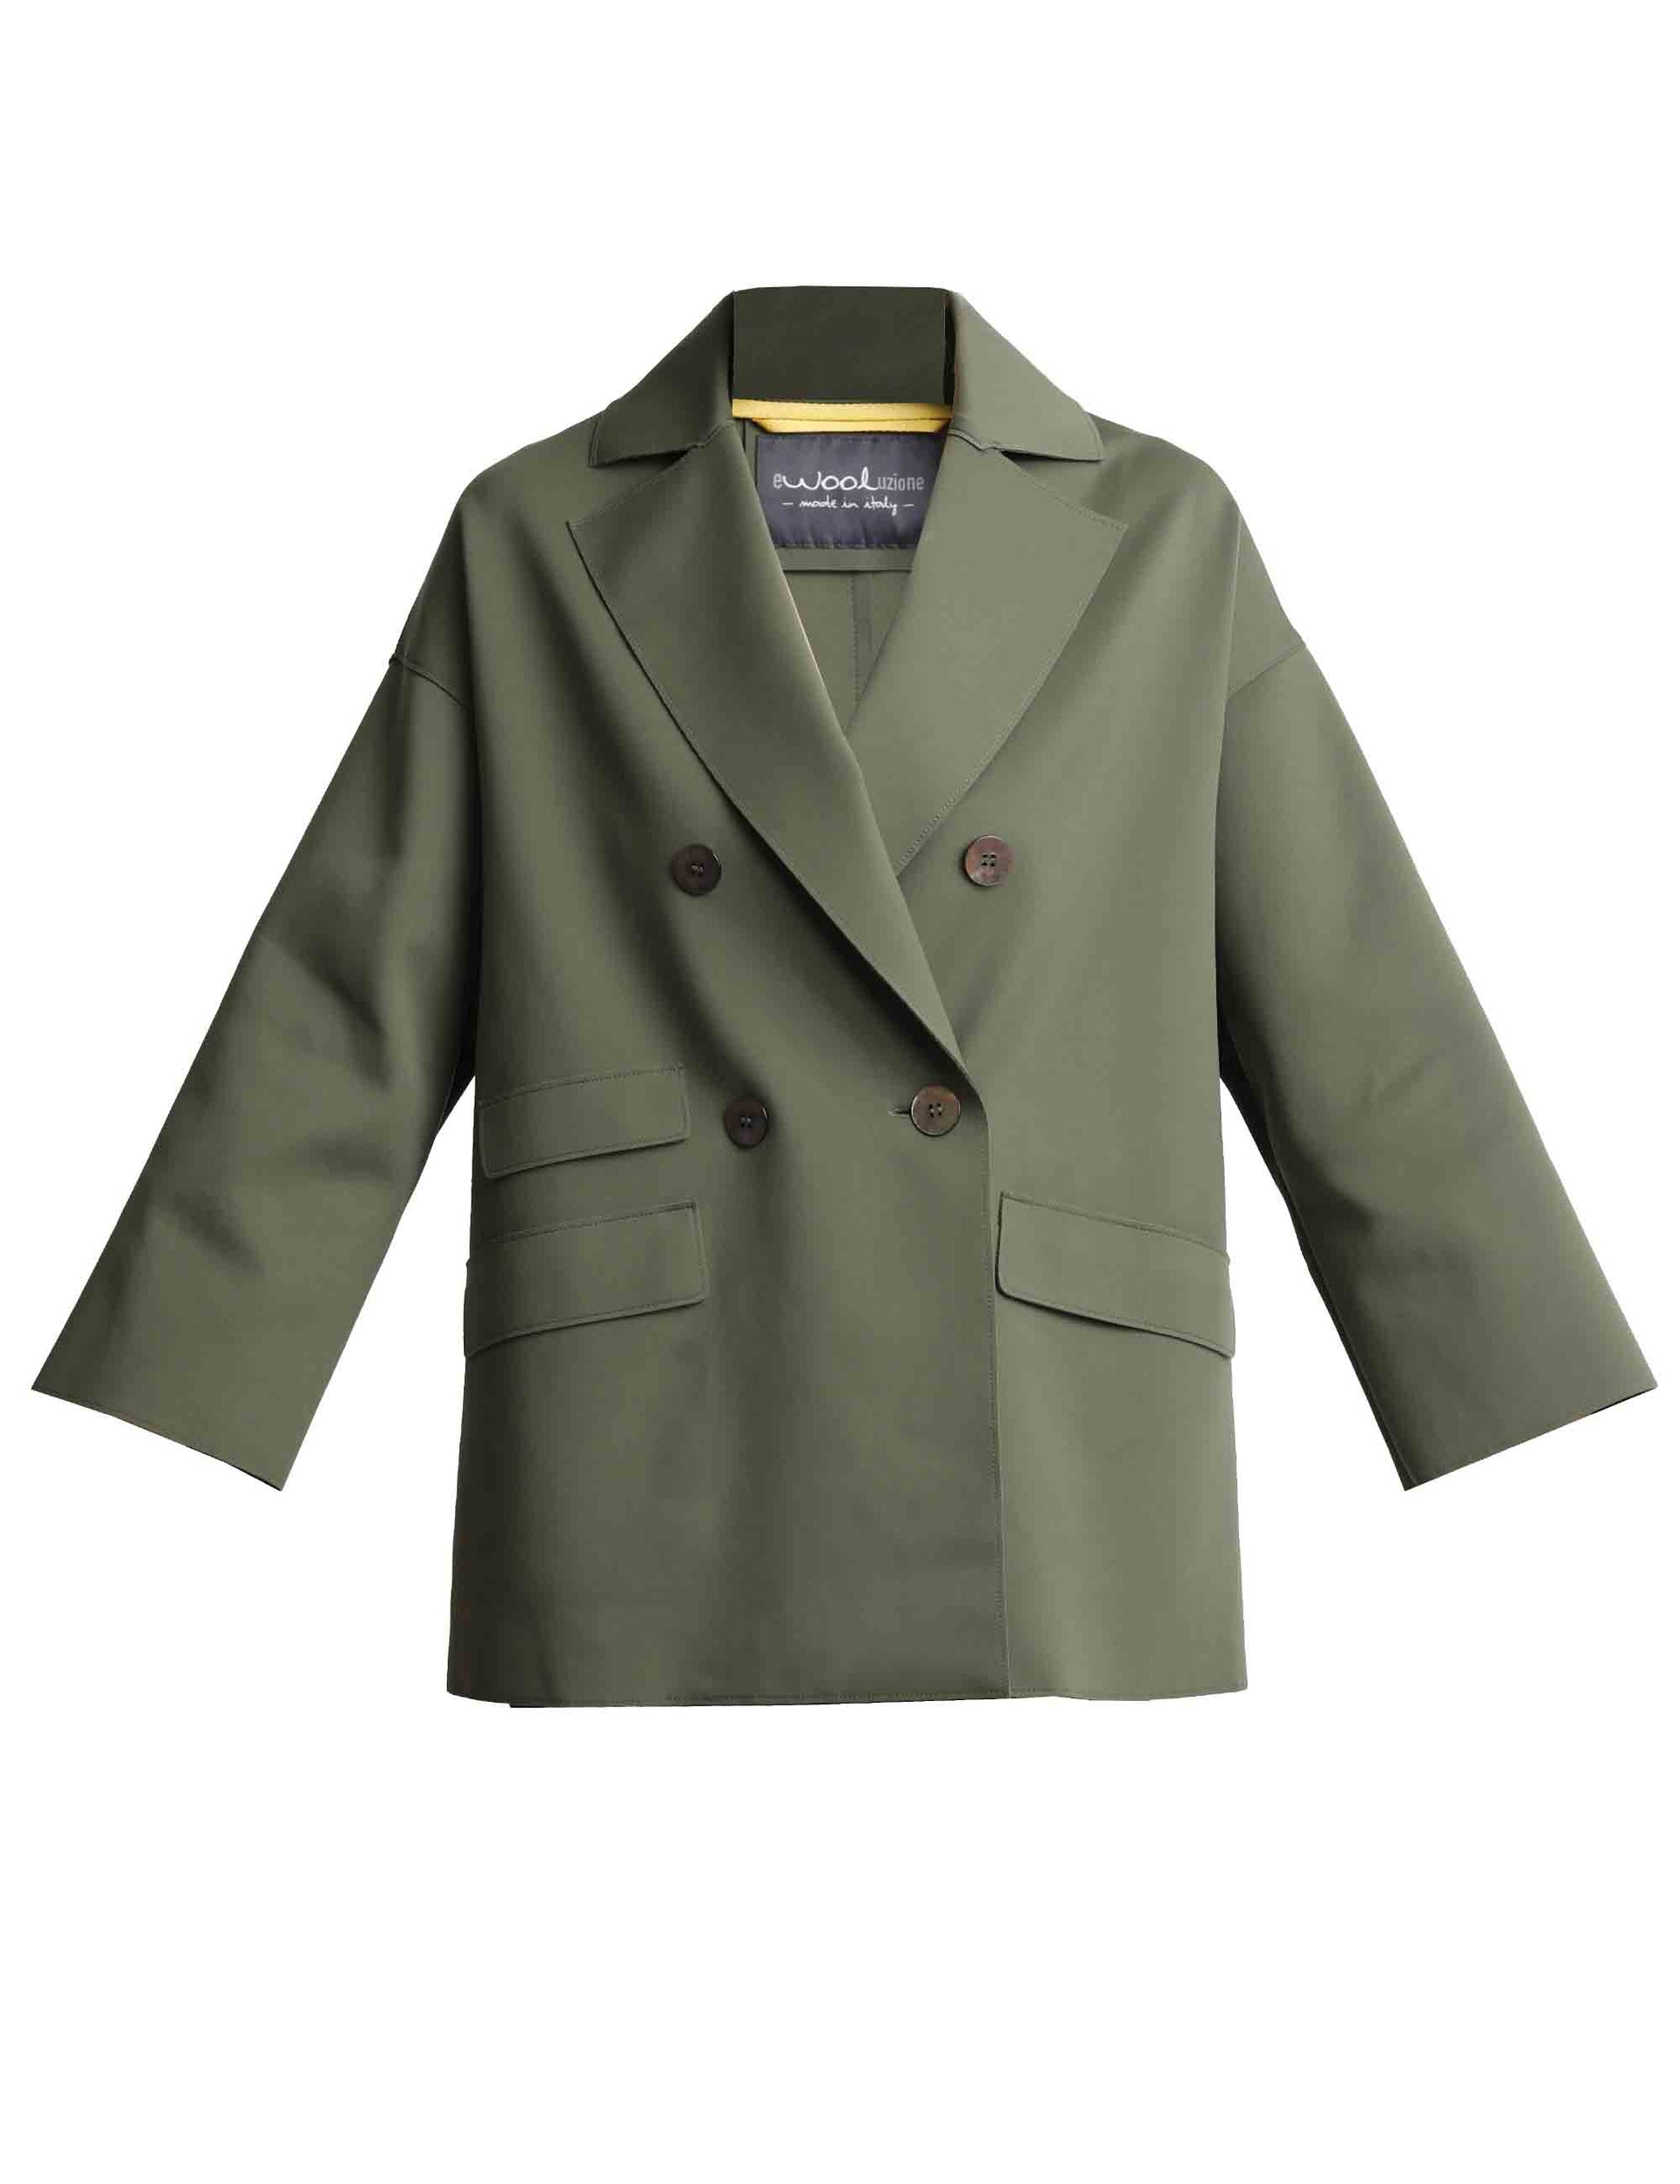 Sole women's double-breasted jackets in green fabric with long sleeves